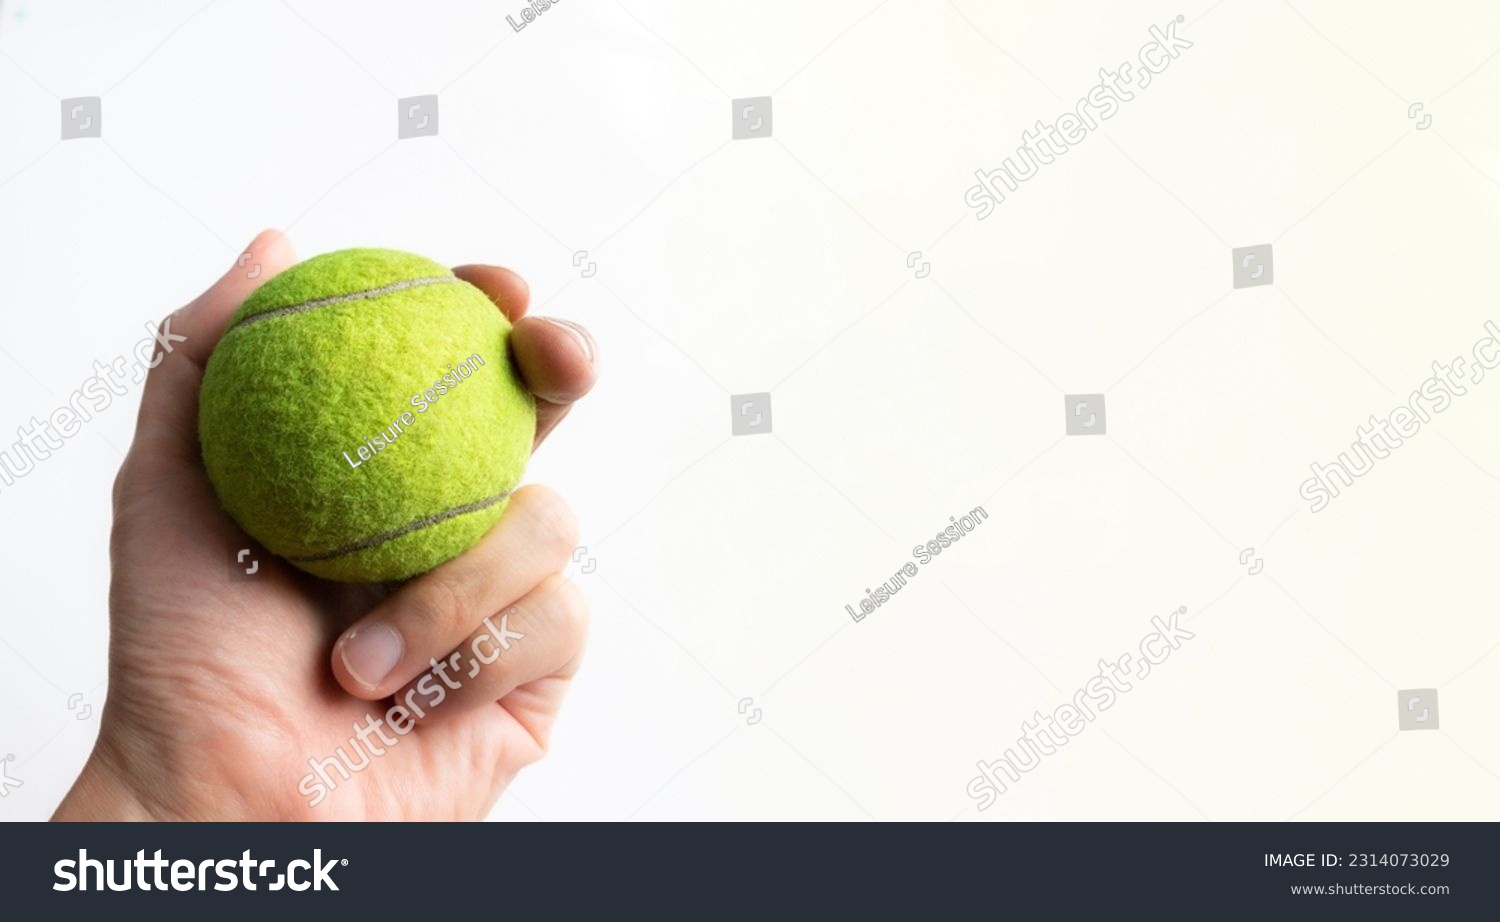 Hand holding a tennis ball, after some edits. #2314073029